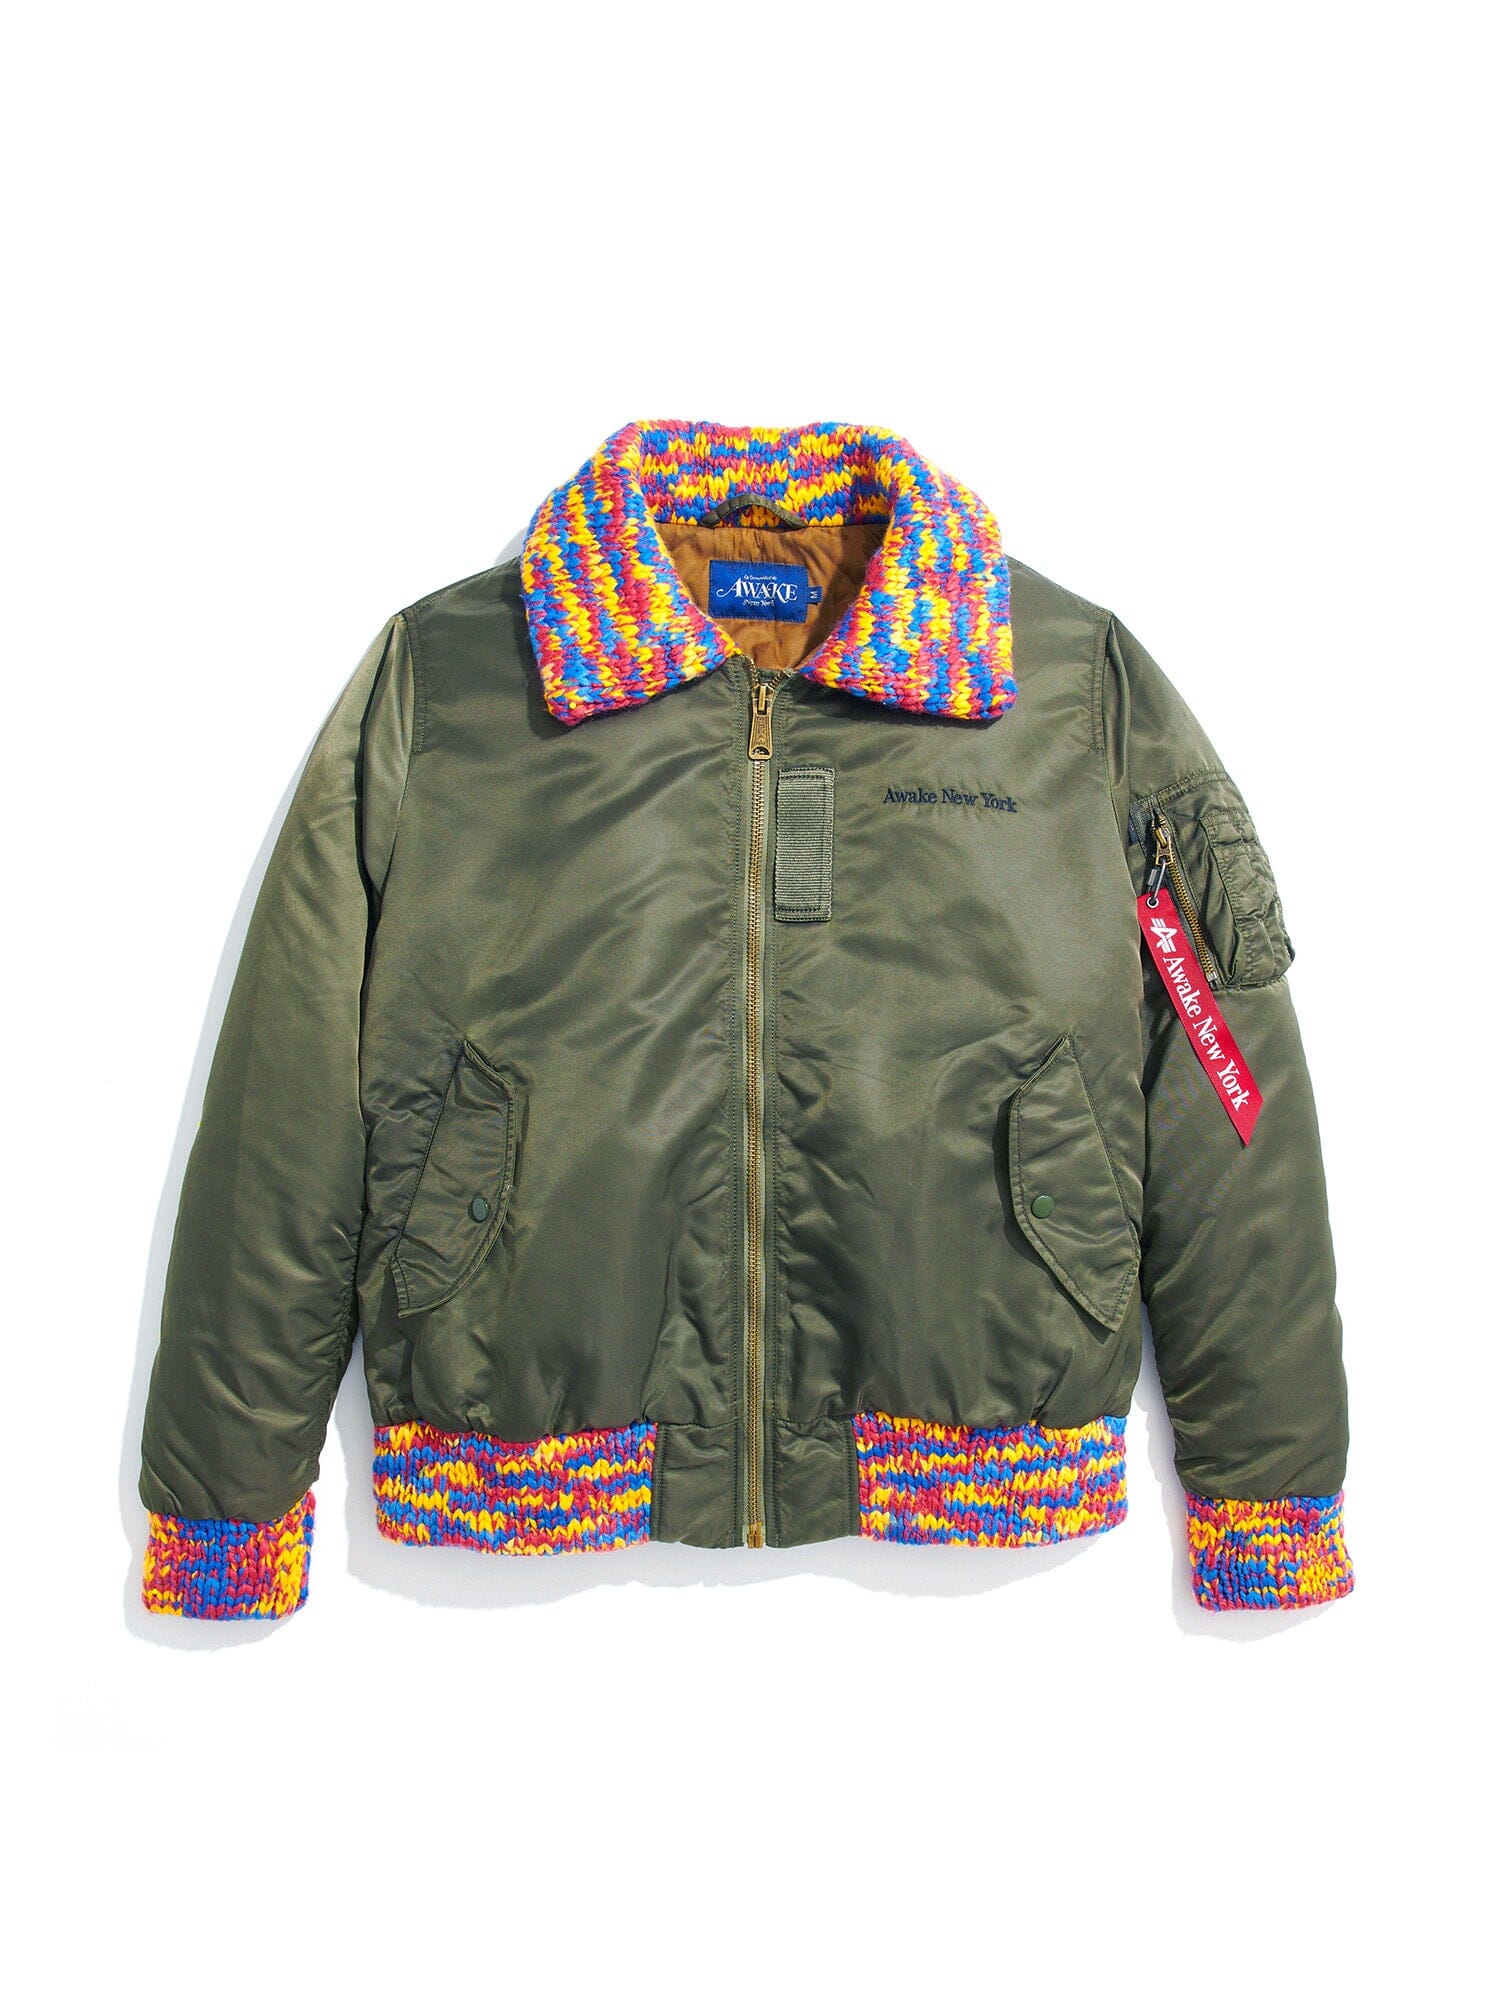 AWAKE X ALPHA MA-1 KNIT TRIMMED WASHED BOMBER JACKET OUTERWEAR Alpha Industries OLIVE 2XL 